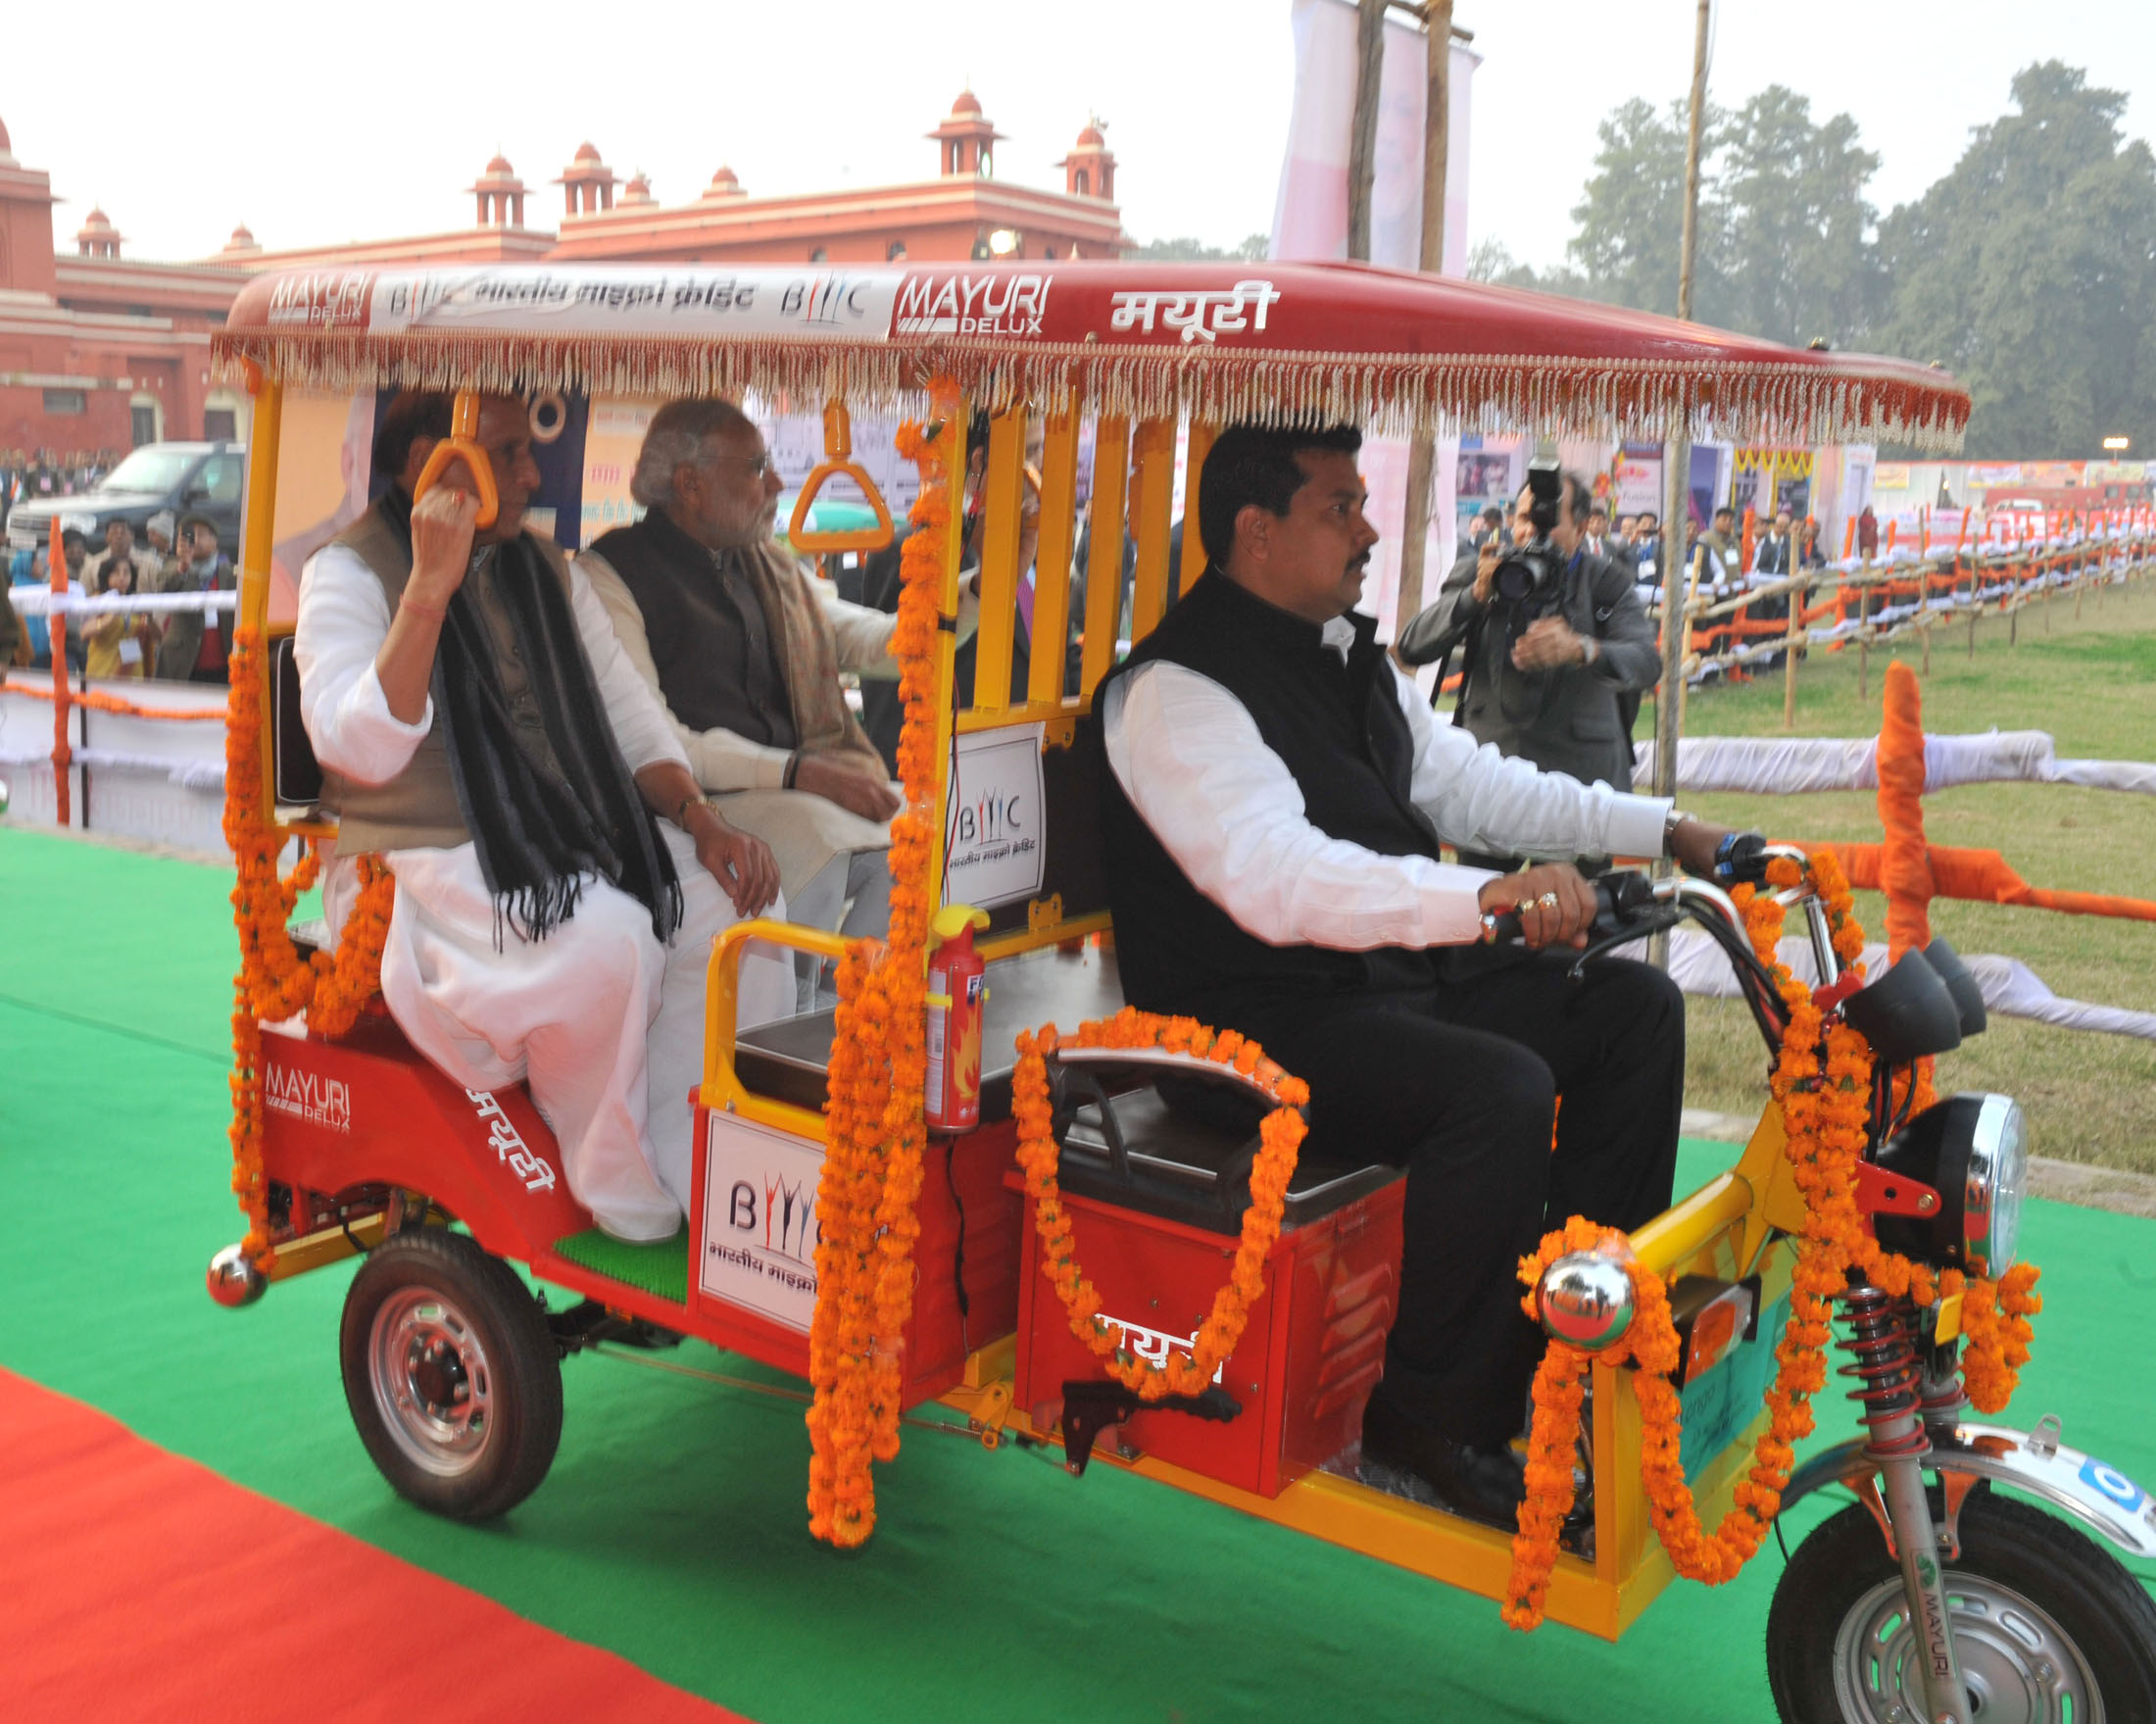 The Prime Minister, Shri Narendra Modi taking a ride on E-Rickshaw, after the distribution at Rickshaw Sangh programme by the Bhartiya Micro Credit, in Lucknow, Uttar Pradesh on January 22, 2016.  	The Union Home Minister, Shri Rajnath Singh is also seen.